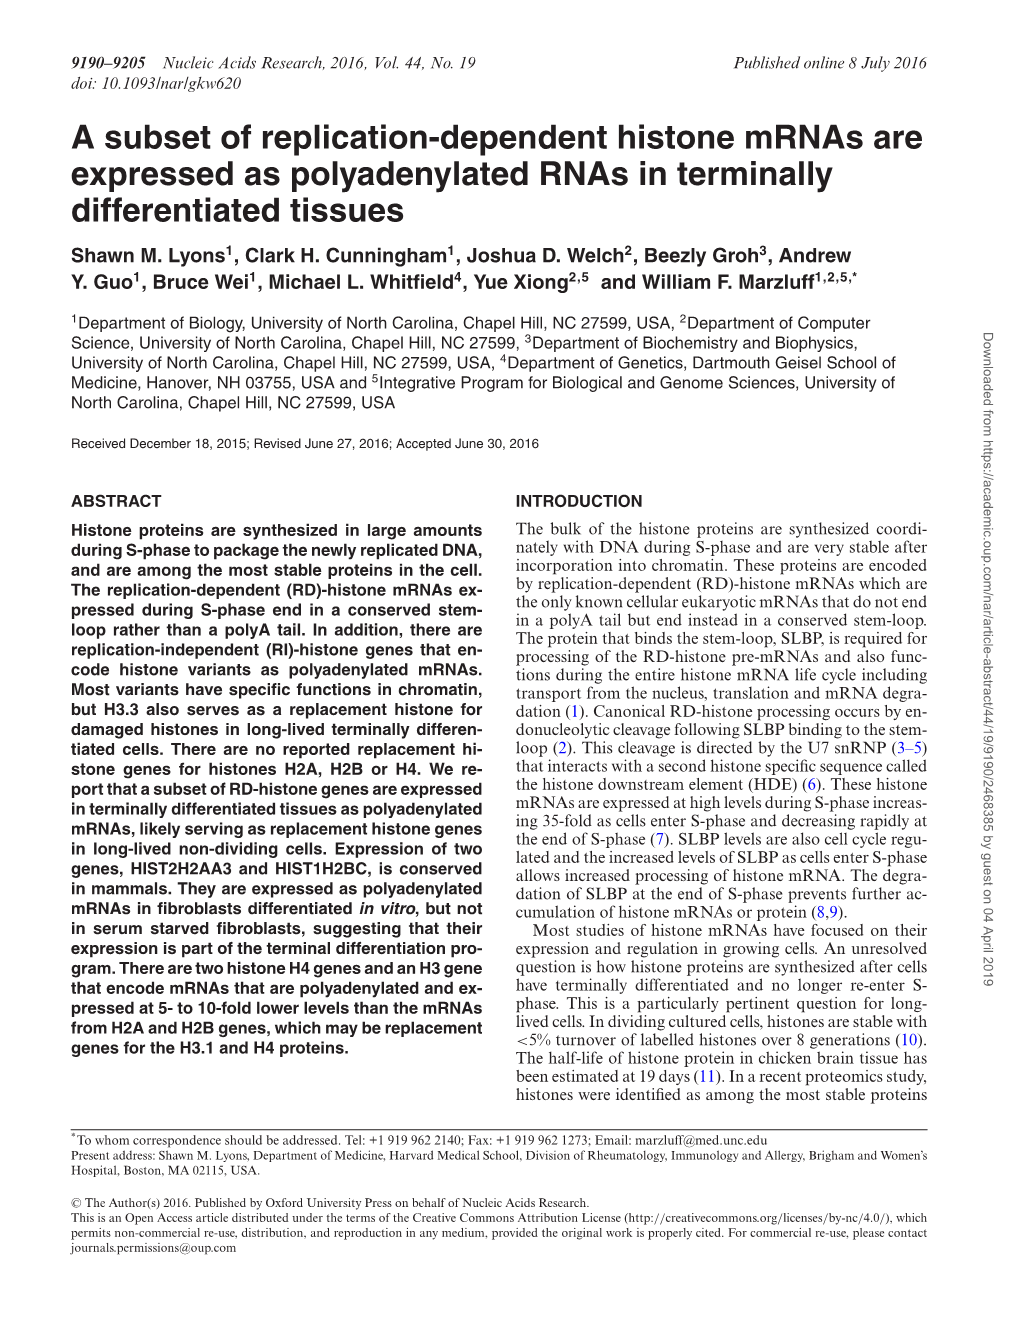 A Subset of Replication-Dependent Histone Mrnas Are Expressed As Polyadenylated Rnas in Terminally Differentiated Tissues Shawn M